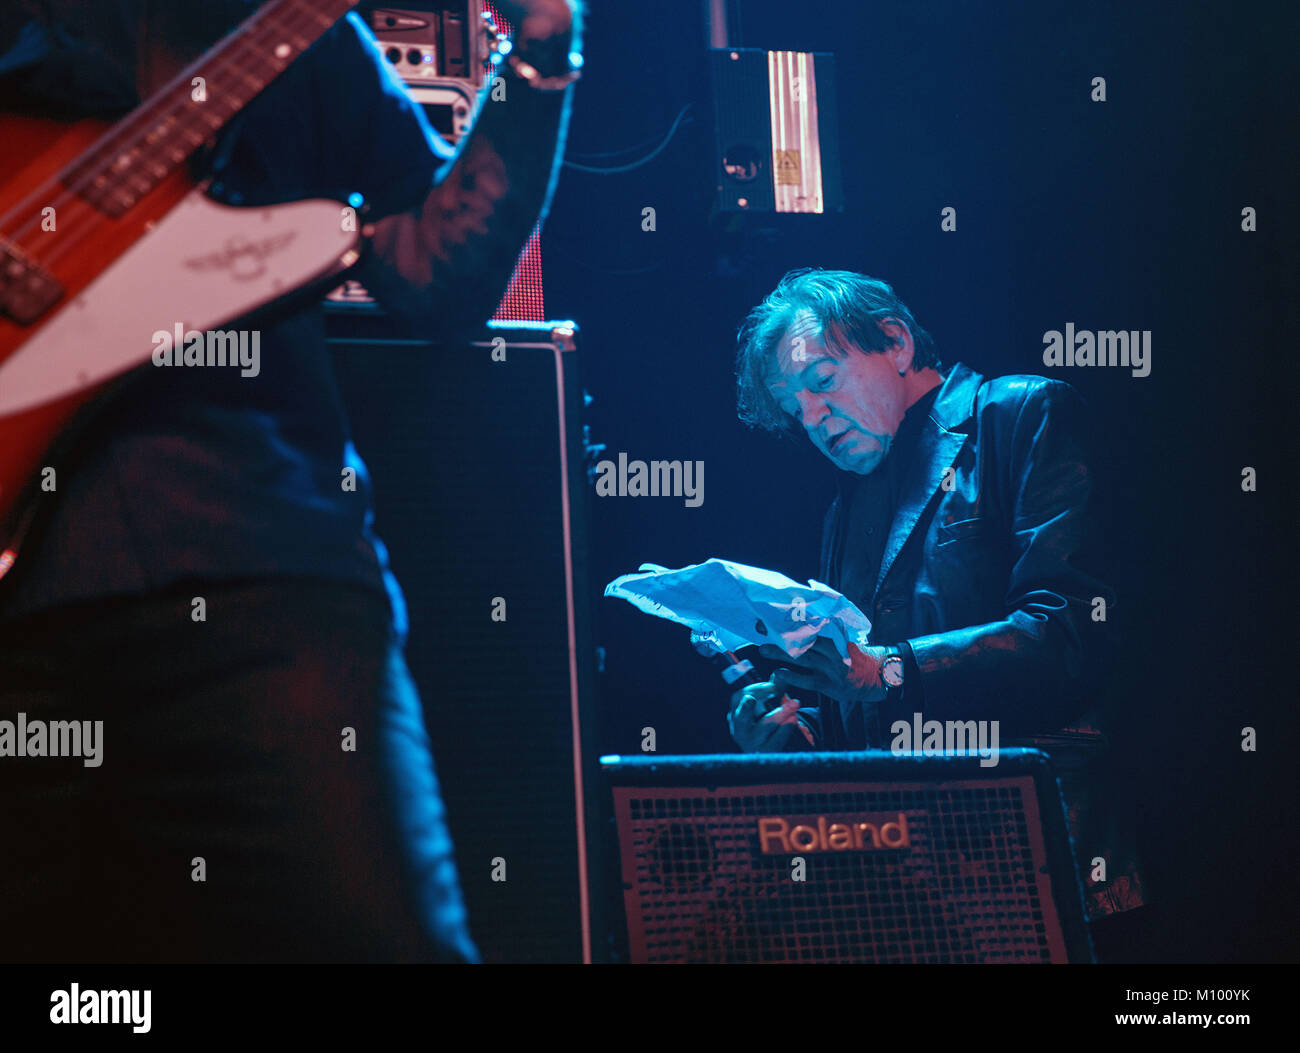 Liverpool, Merseyside, UK. 17th June, 2017. MARK E SMITH lead Singer of UK Indie band, The Fall performing at Liverpool Arts Club Januray 2017 Credit: Andy Von Pip/ZUMA Wire/Alamy Live News Stock Photo